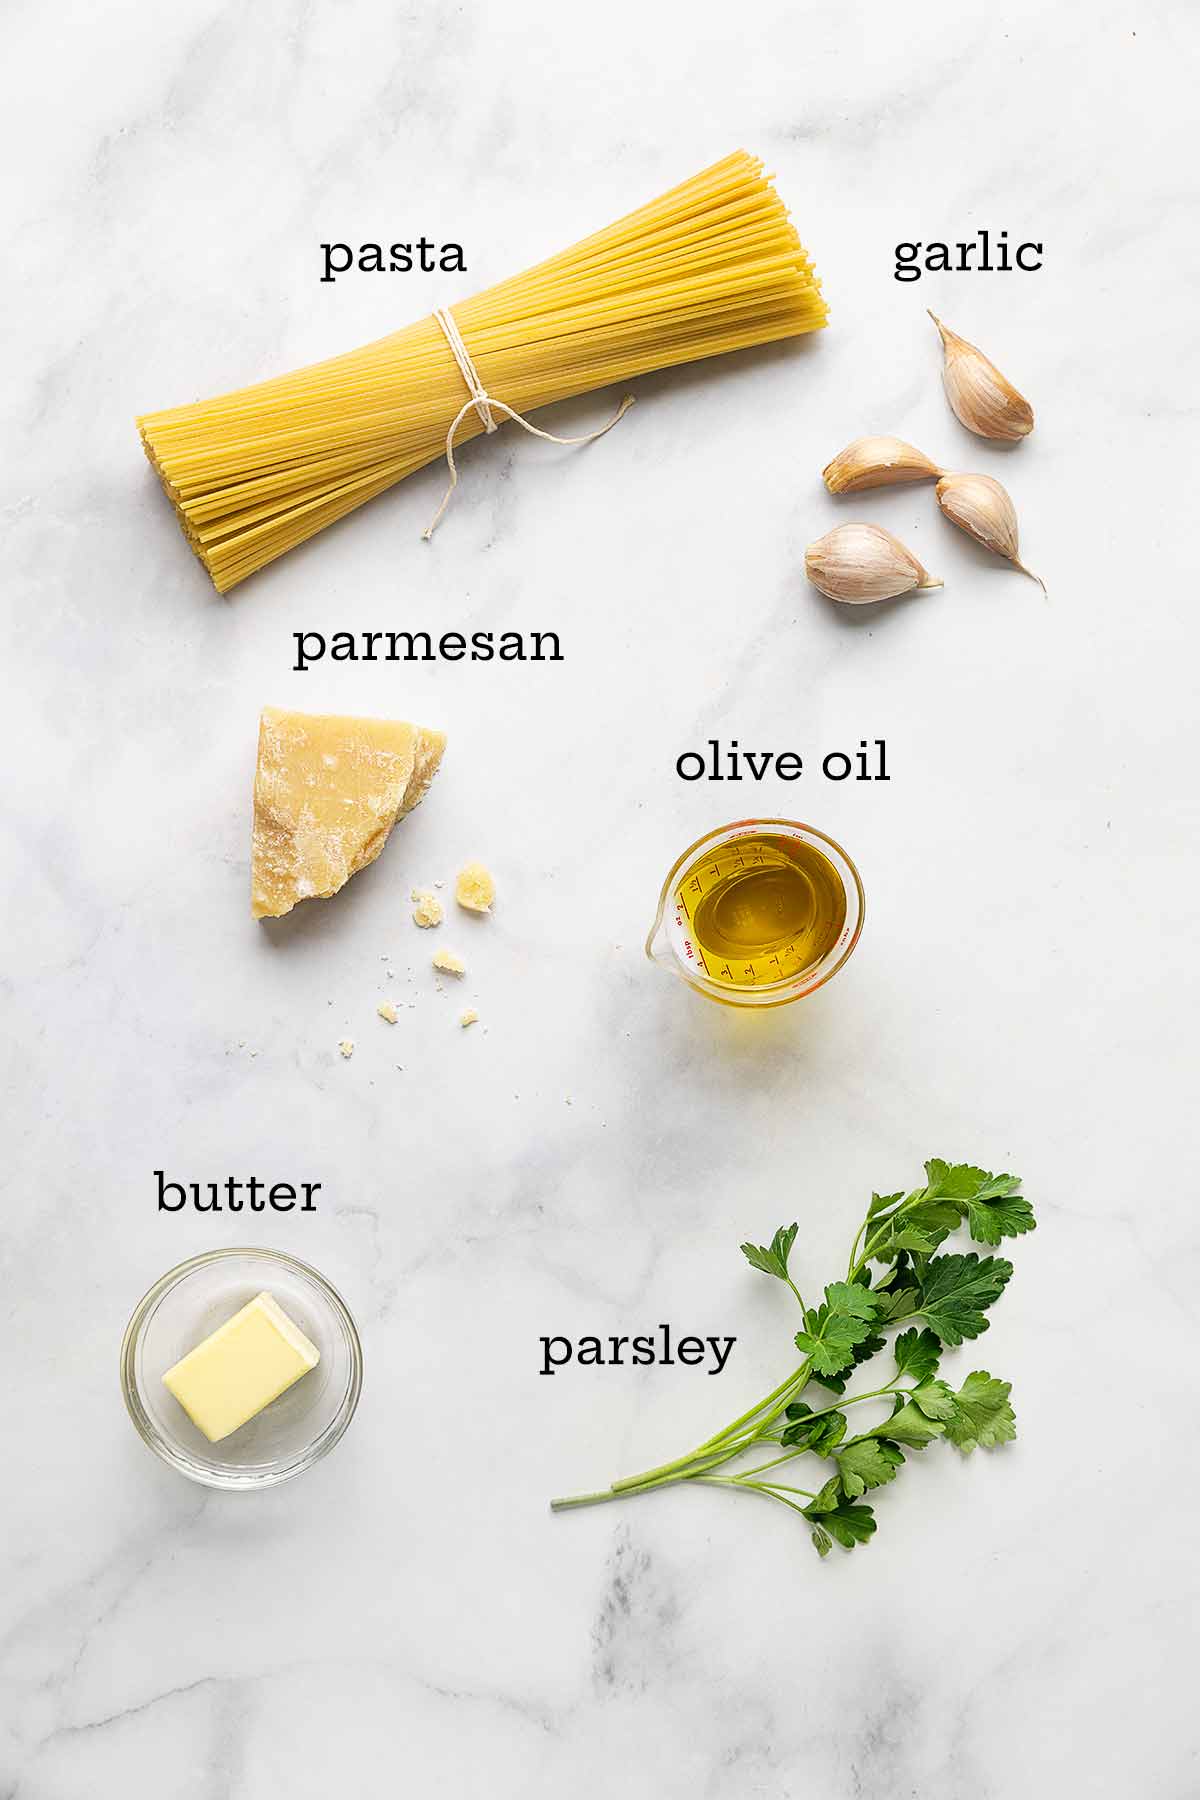 Ingredients for pasta with butter and parmesan--pasta, garlic, parmesan cheese, olive oil, parsley, and butter.